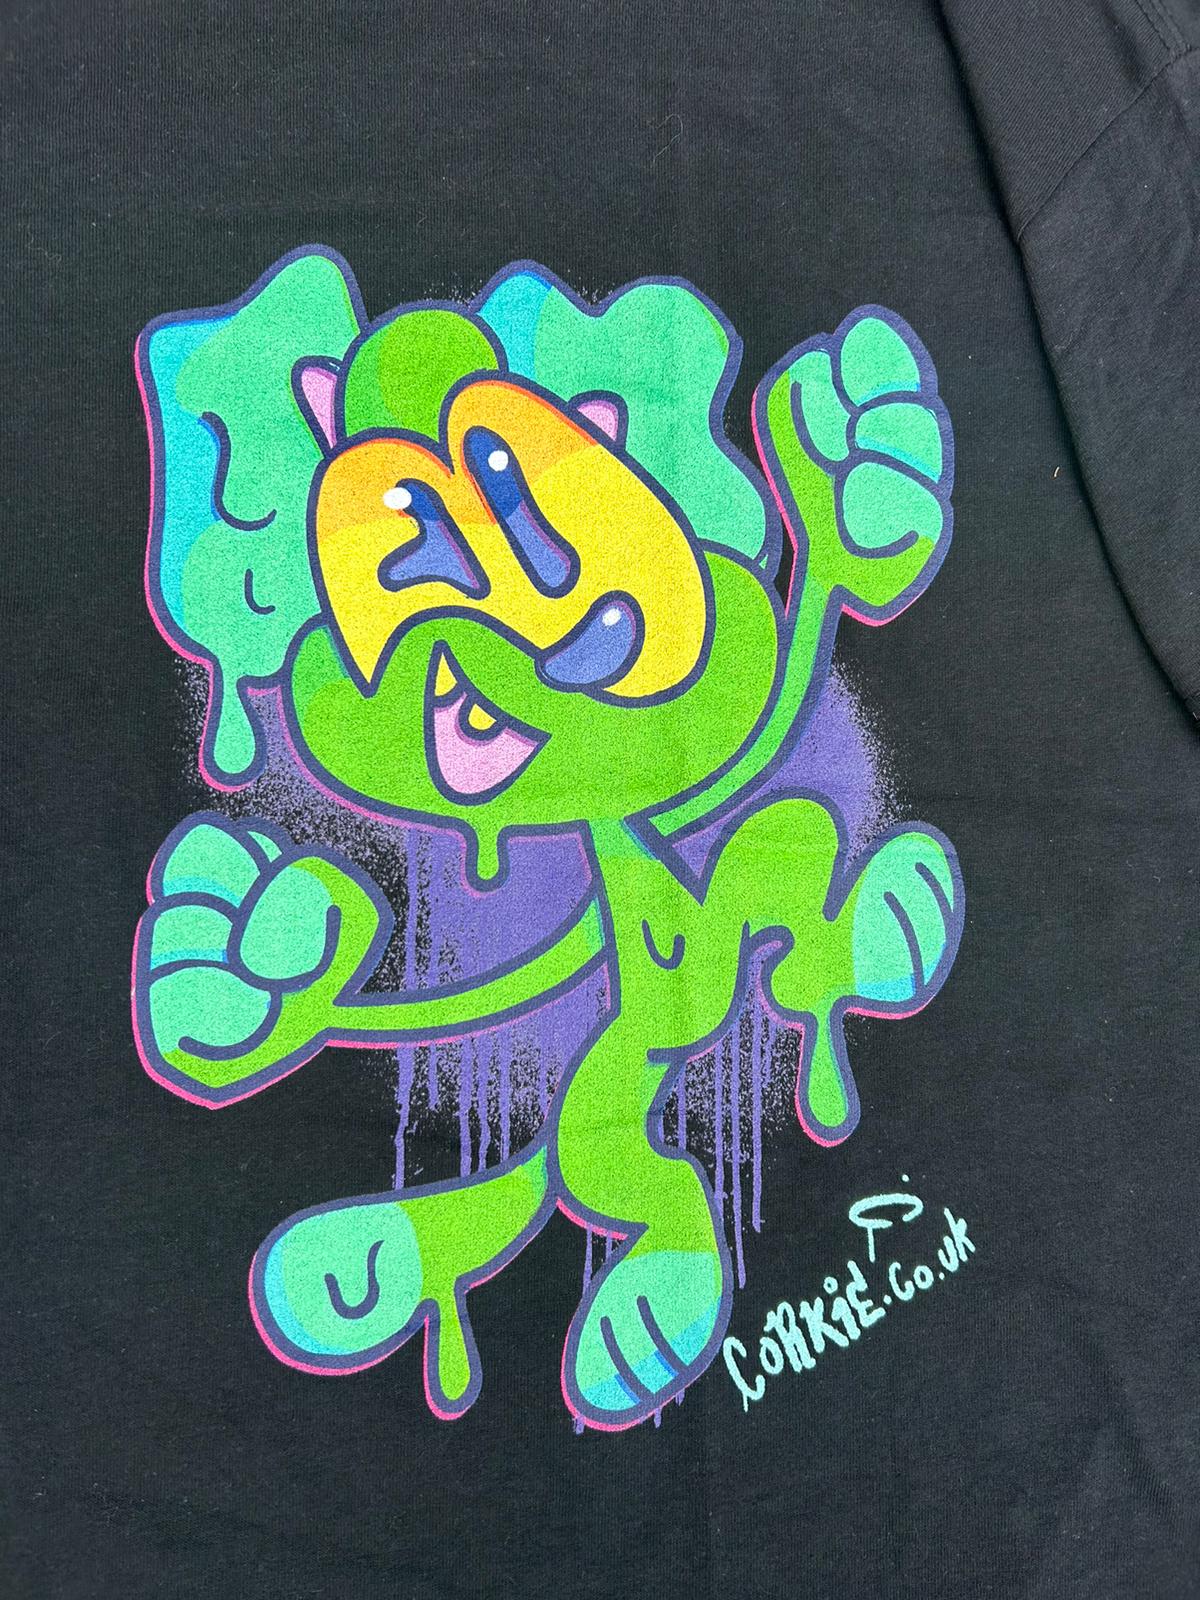 Green monster character on a black streetwear t-shirt, in a graffiti art style, by brand CORKiE